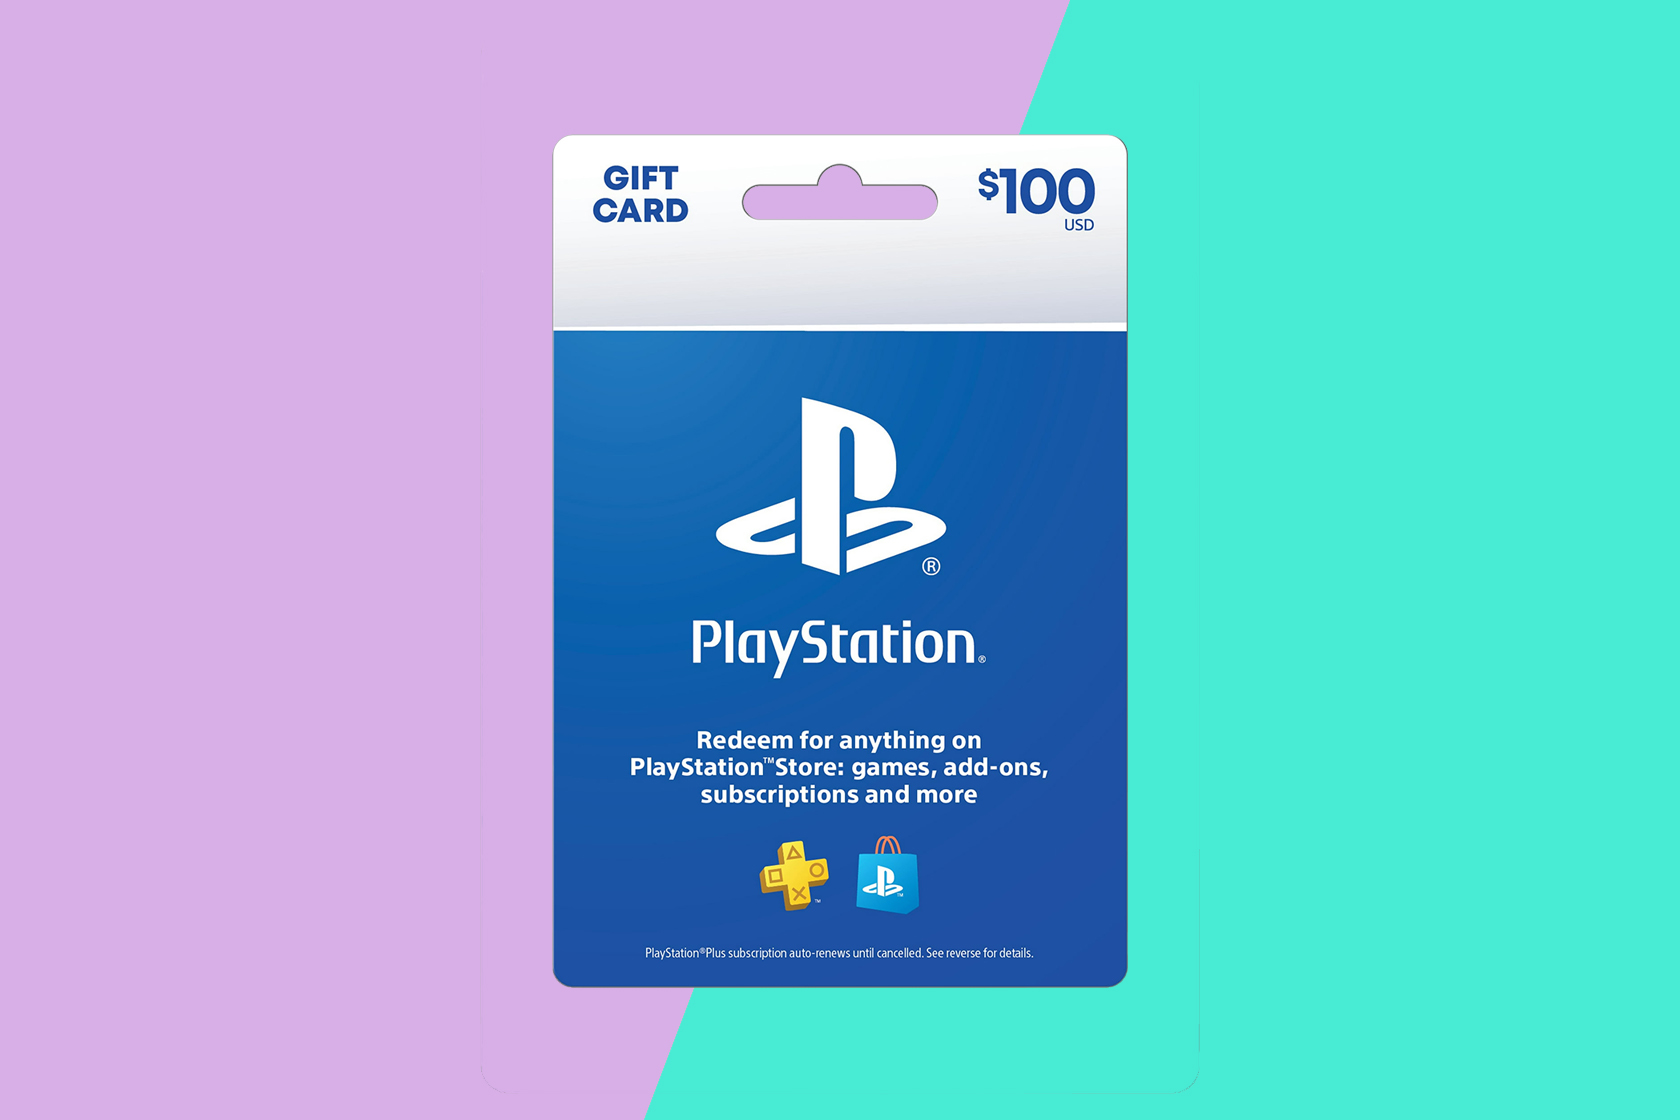  $75 PlayStation Store Gift Card [Digital Code] : Video Games